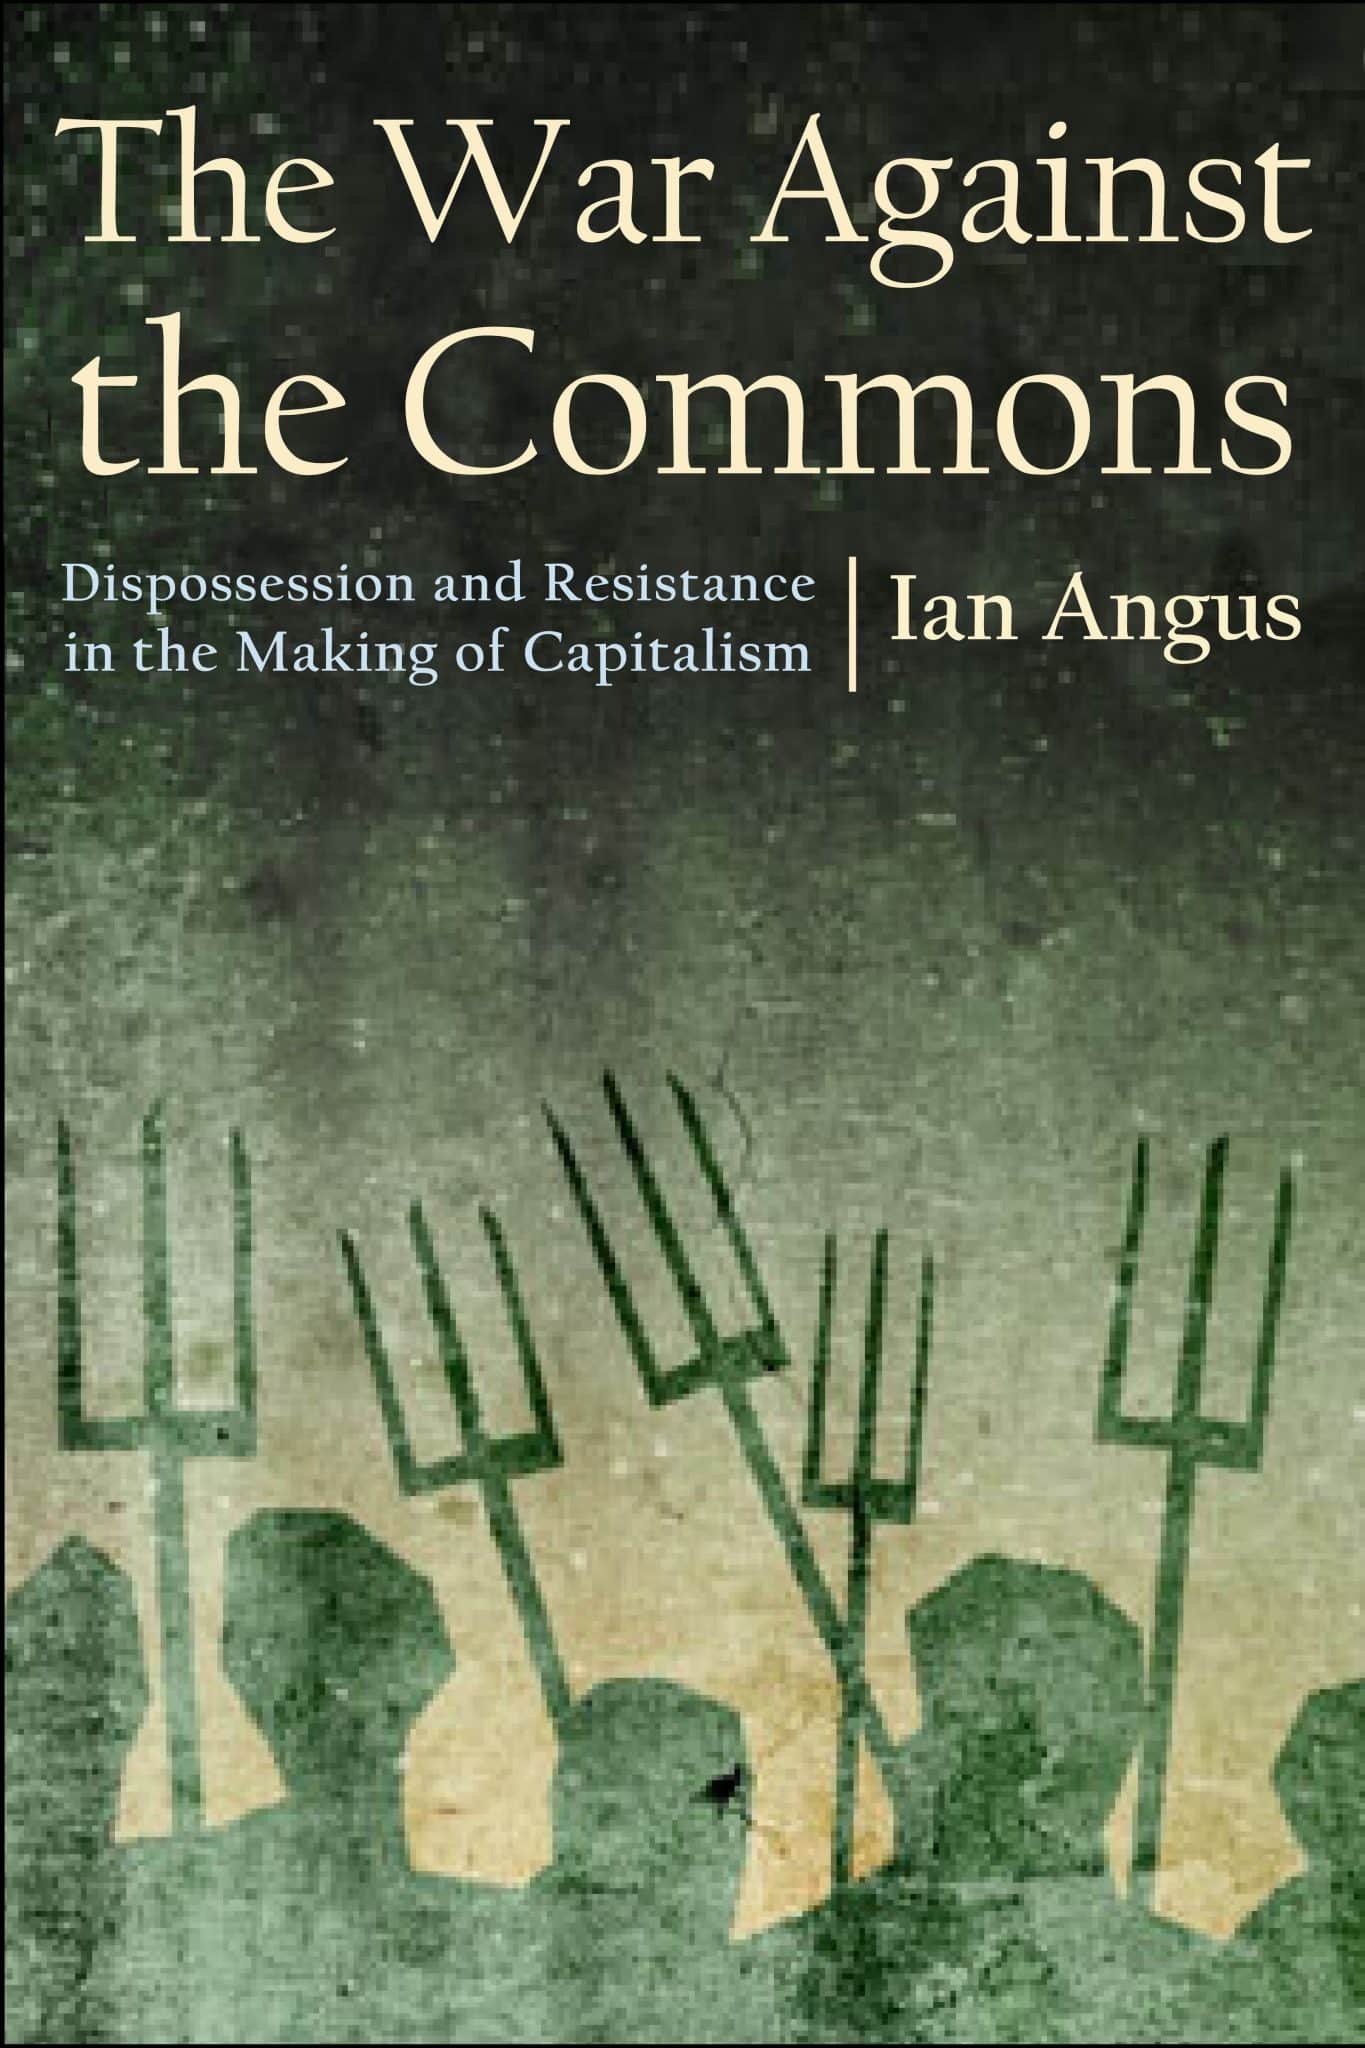 of　New!　in　Capitalism　The　the　War　Making　and　the　Against　Commons:　Dispossession　Resistance　Monthly　Review